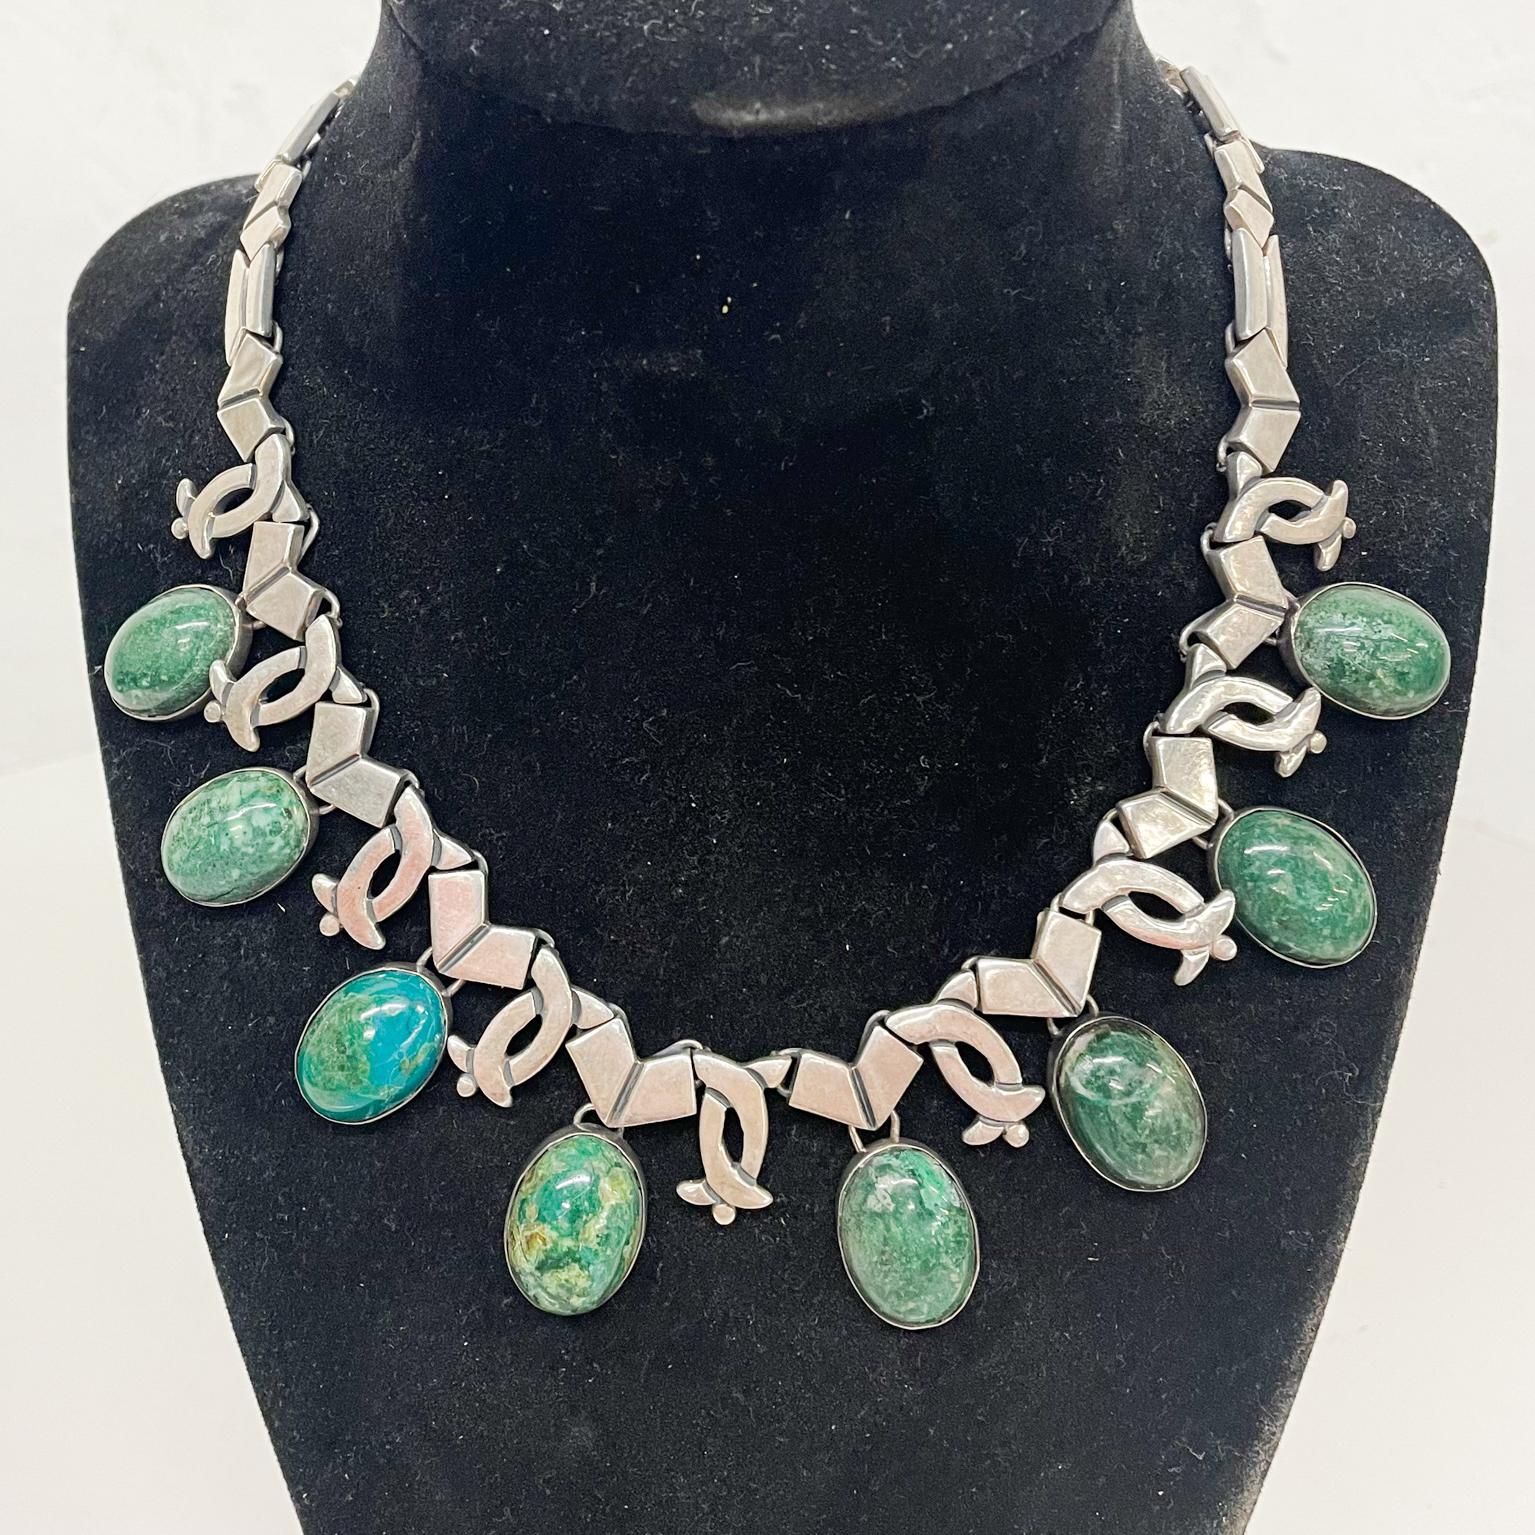 Necklace
Modernist Talleres Los Ballesteros choker collar necklace in green stone and sterling silver 1960s Mexico Taxco
Inspired by William Spratling and Mayan design
Measures: 15 L x 1.25 H inches and weight 81.8 grams
Refer to images